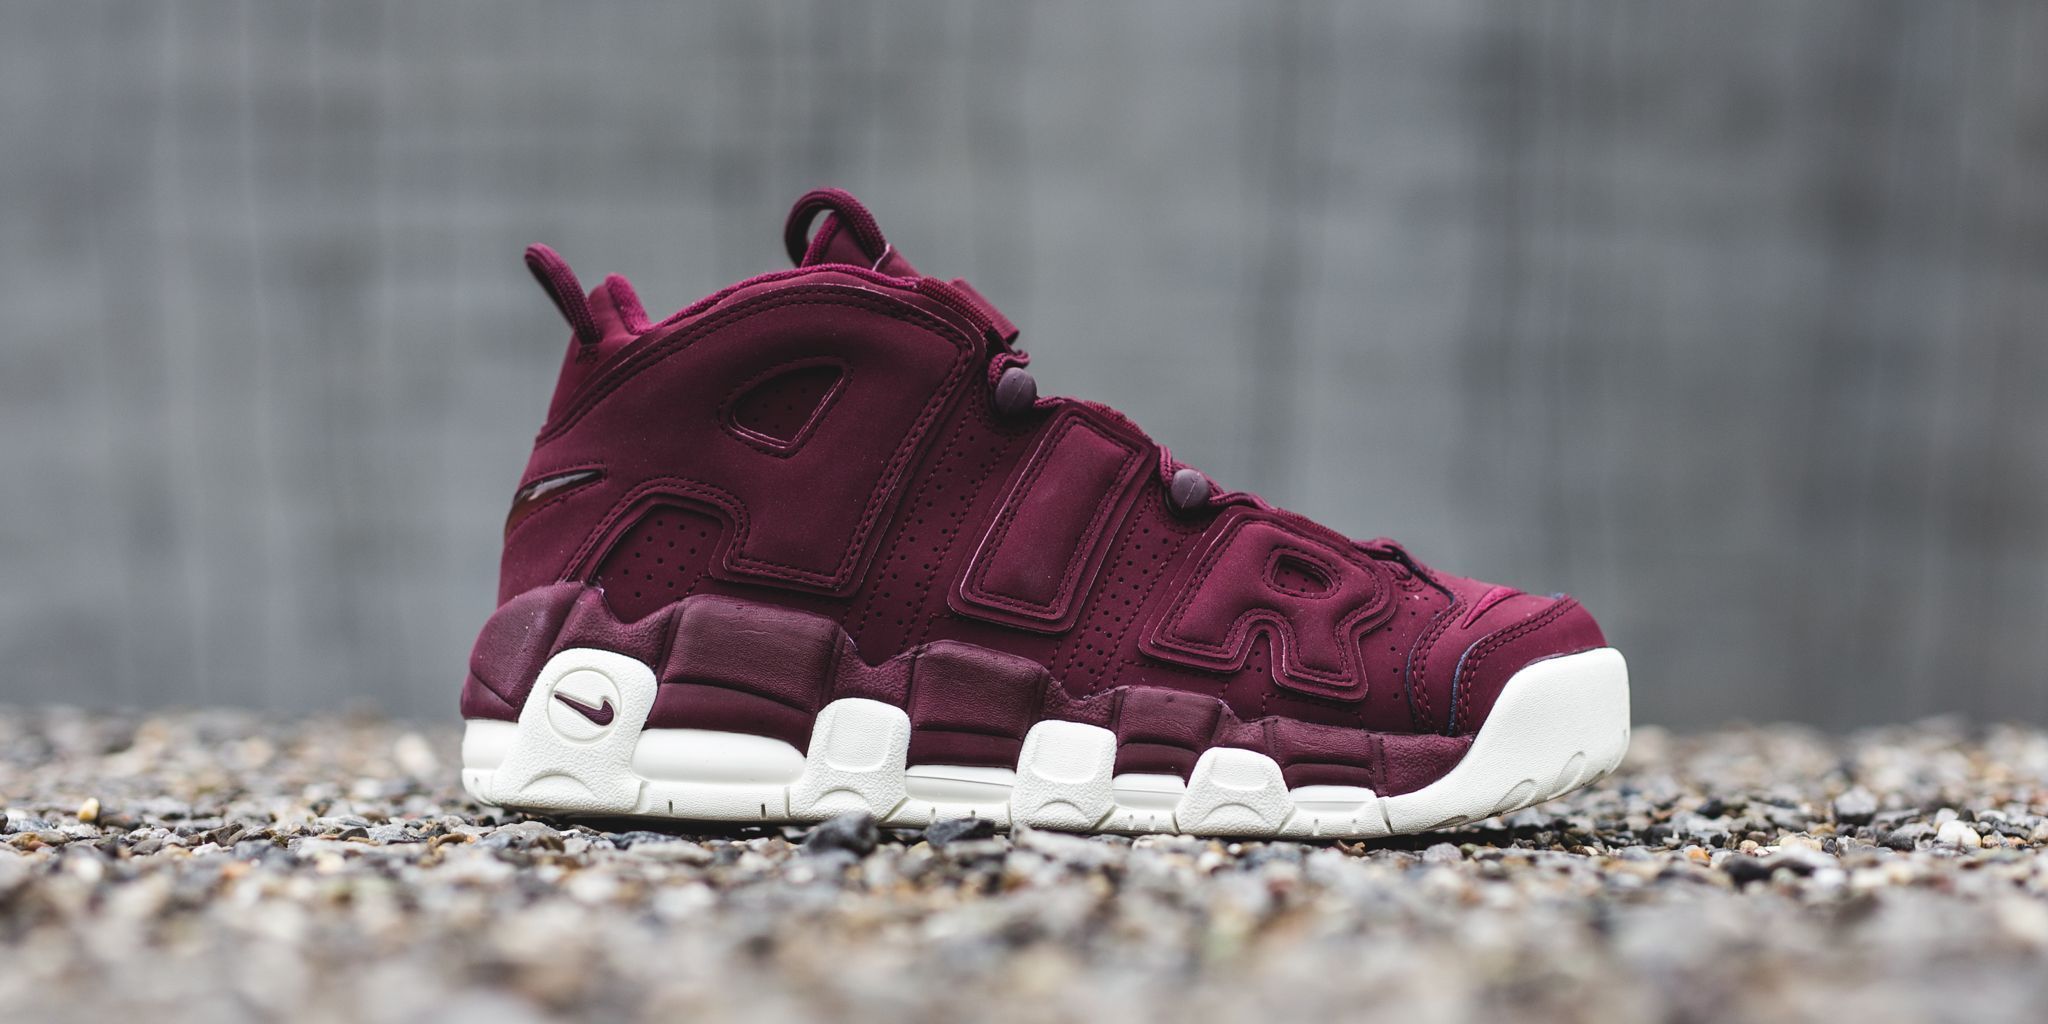 JustFreshKicks on Twitter: "The Nike Air More Uptempo QS "Night Maroon" is available via -&gt; https://t.co/xAcjZMQ4WW https://t.co/CkHWx0rXZQ" /